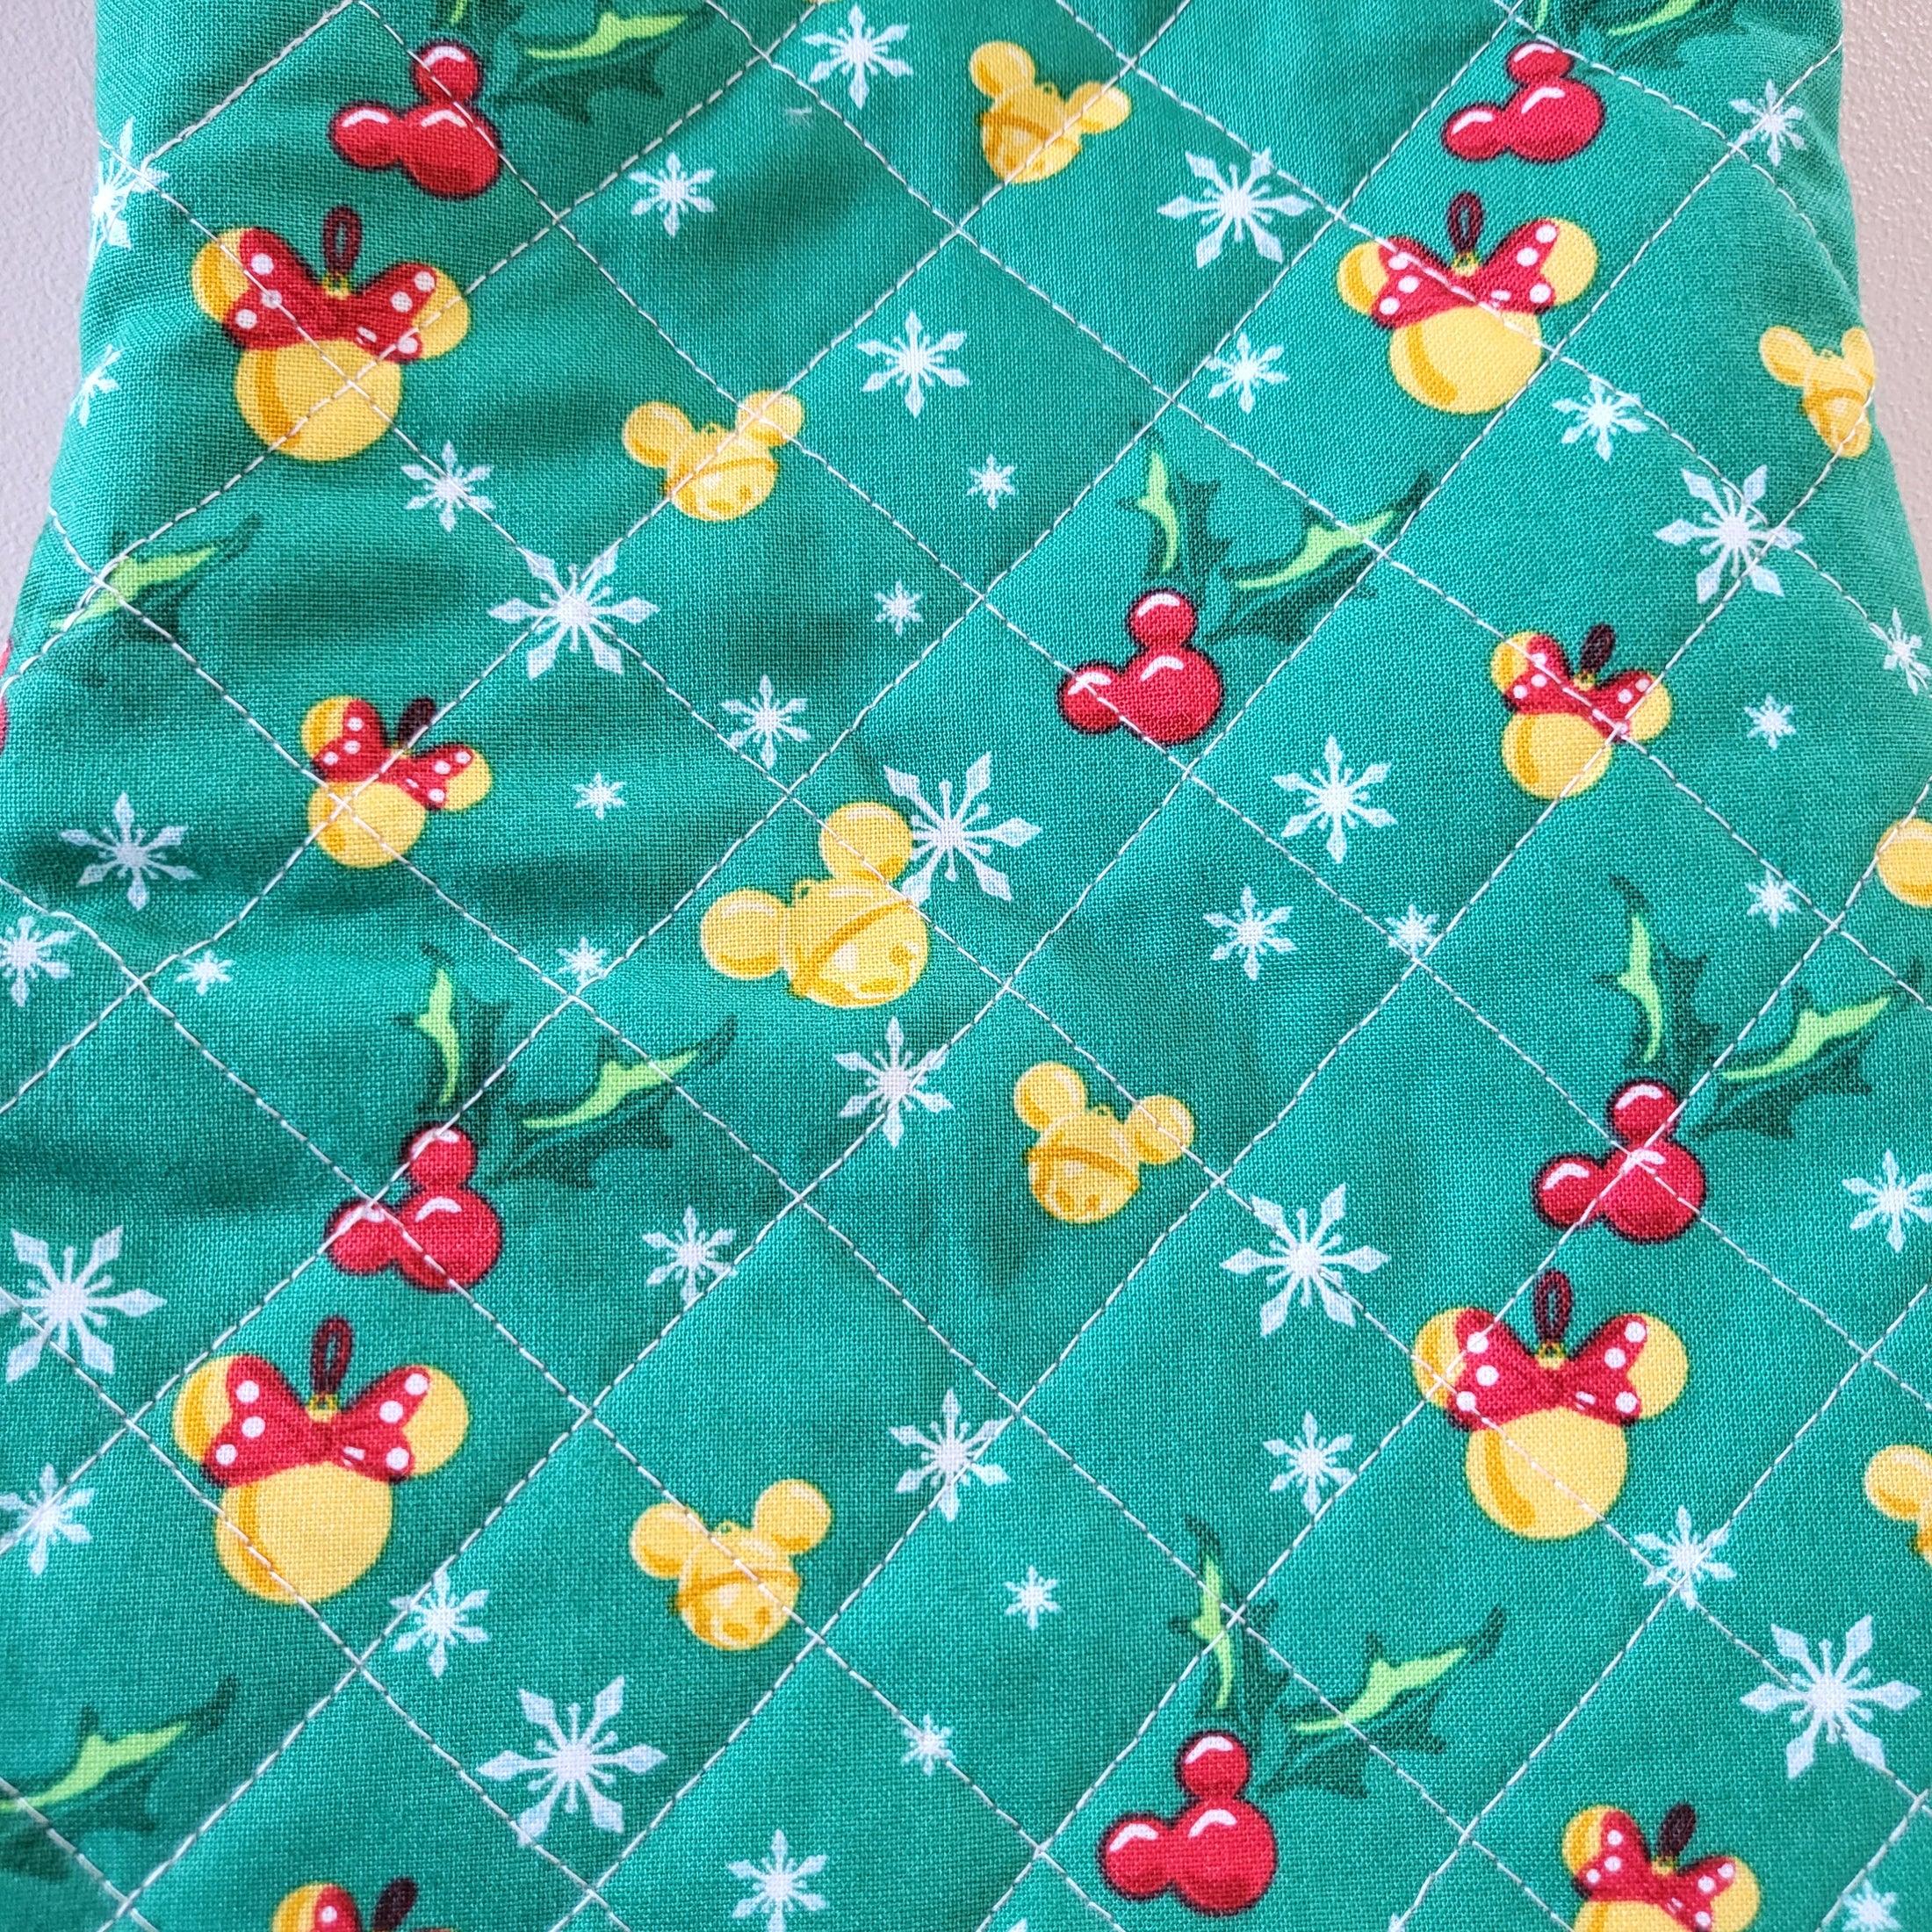 Quilted disney christmas stockings.